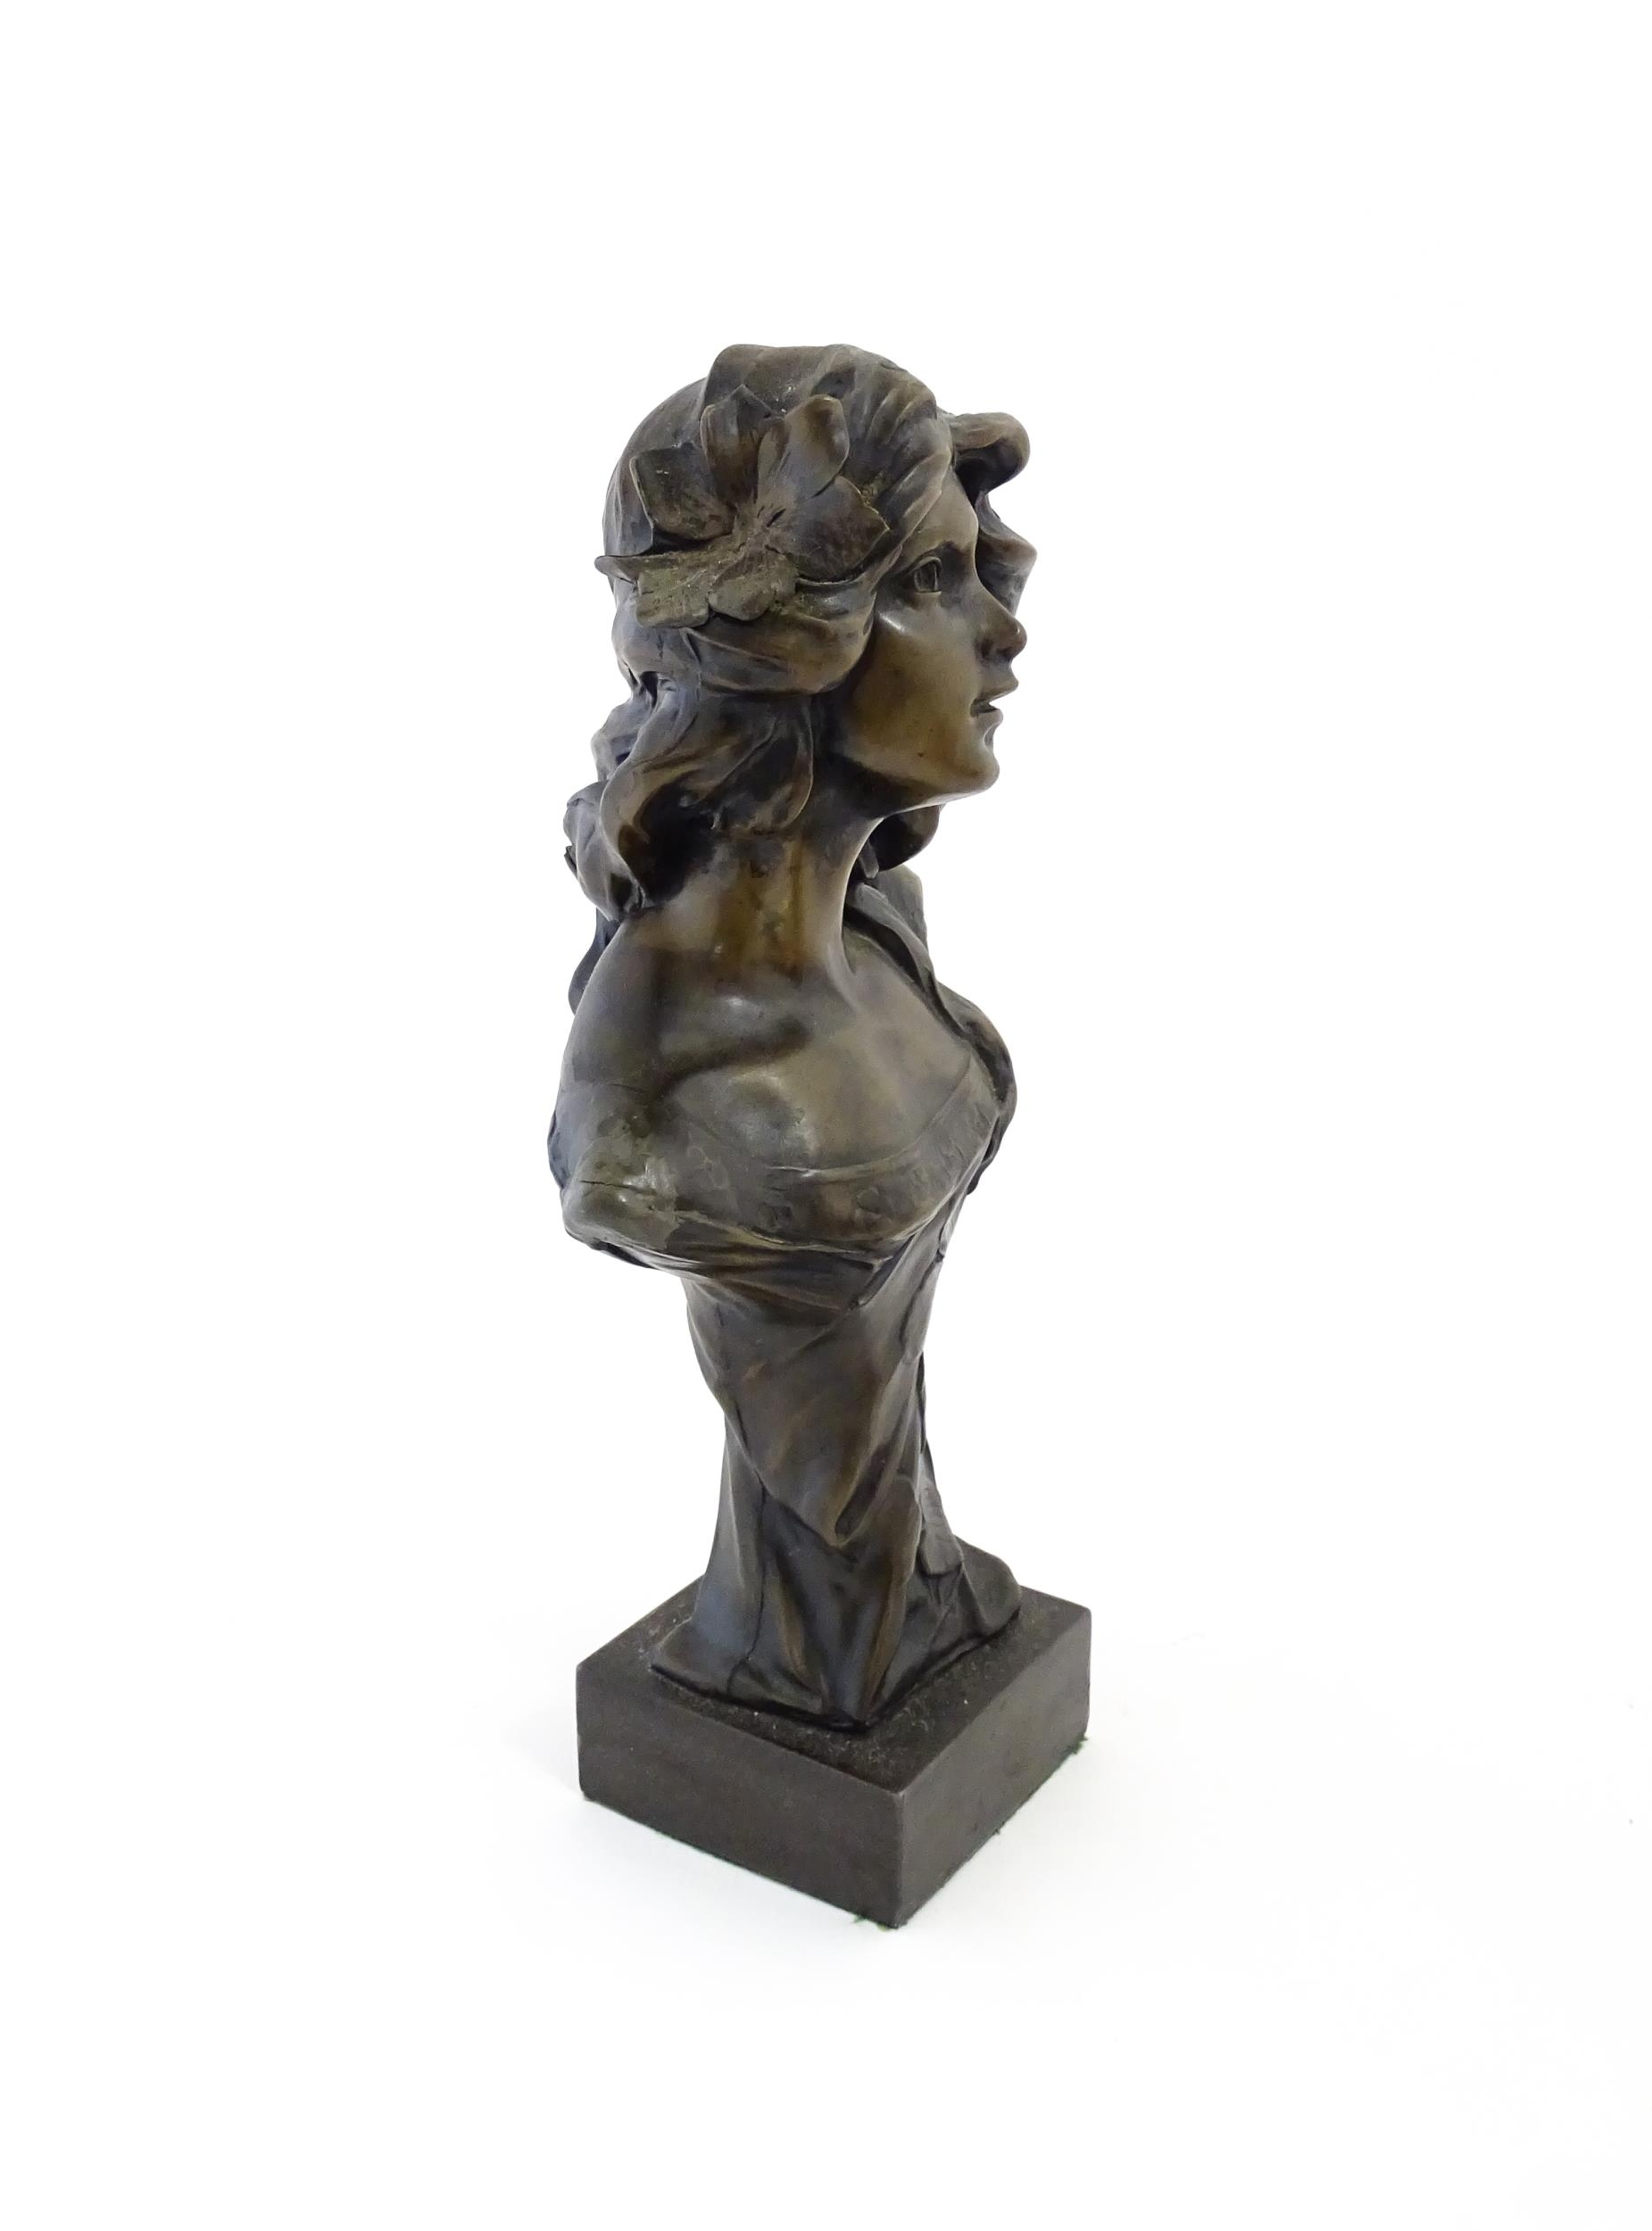 A 20thC cast bust depicting an young lady in the Art Nouveau style after Emmanuel Villanis. - Image 4 of 7